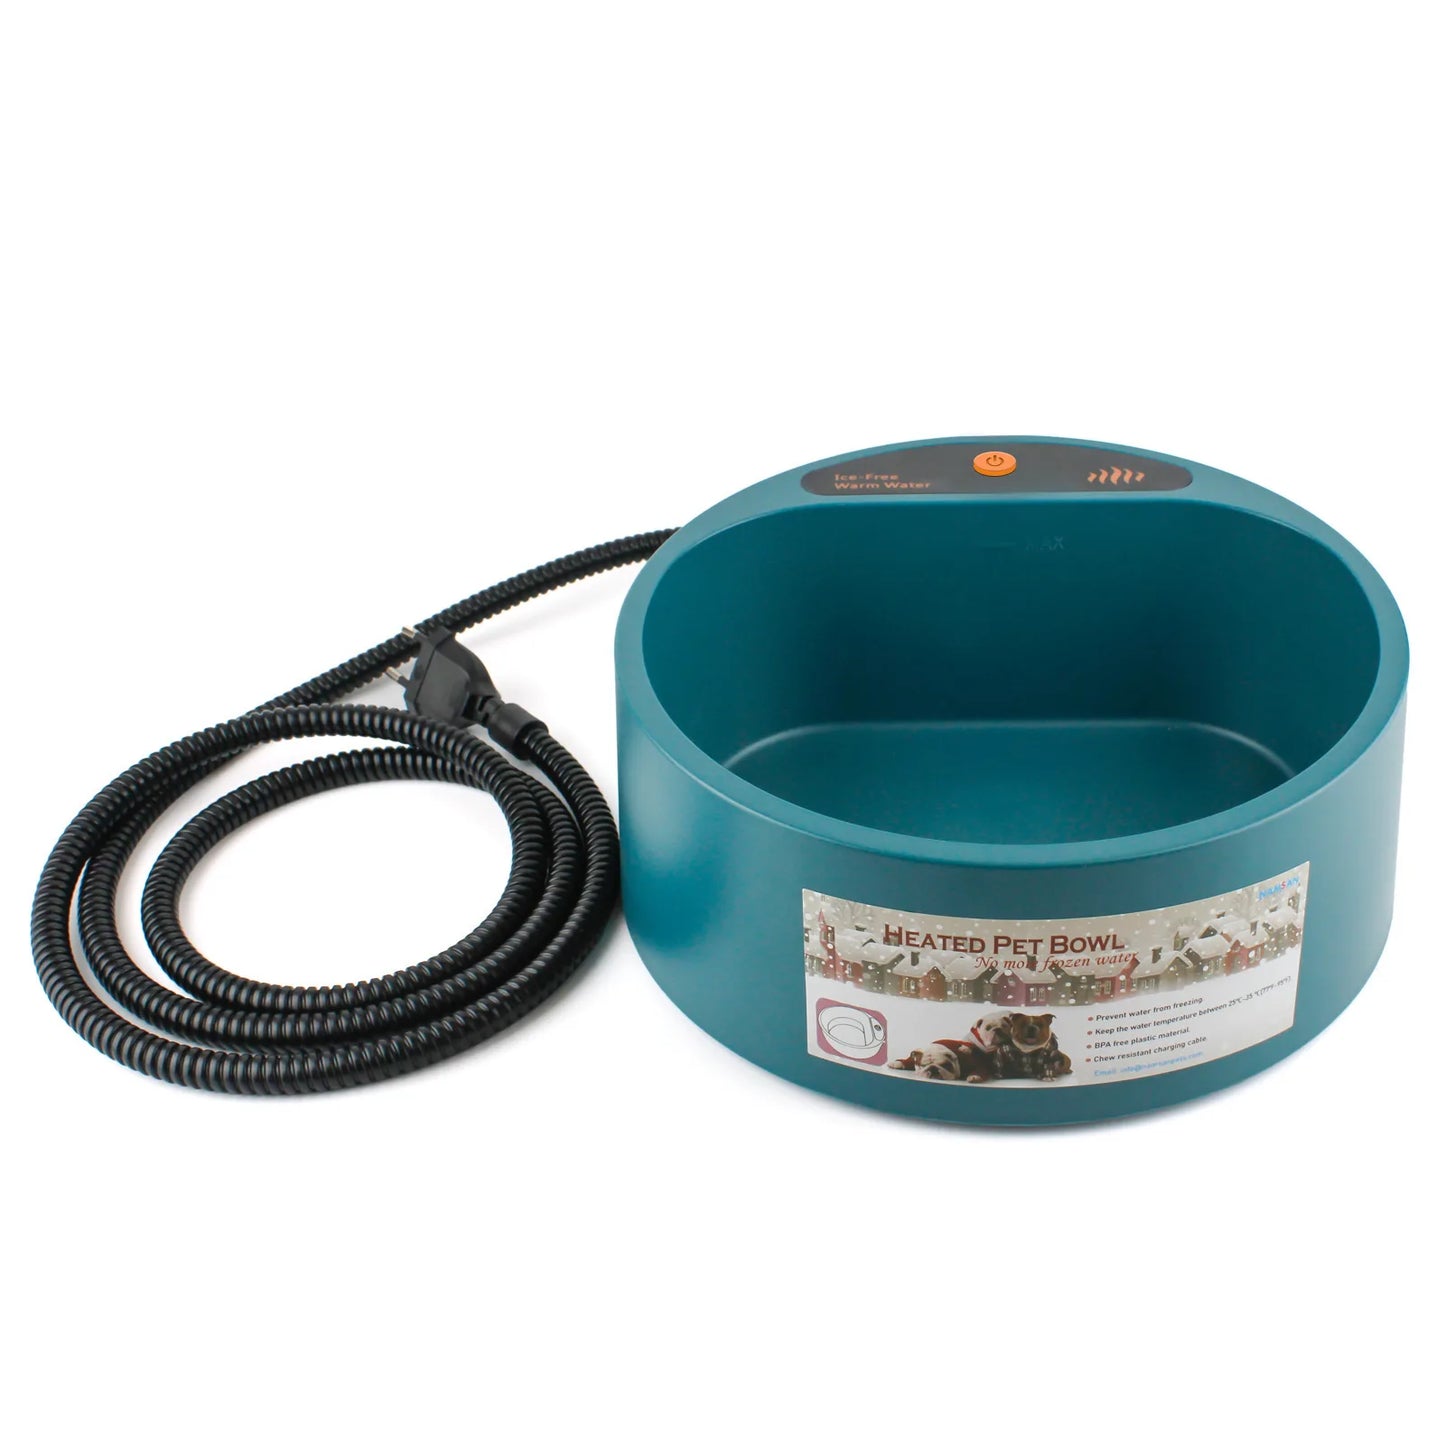 automatic constant temperature insulation water bowl